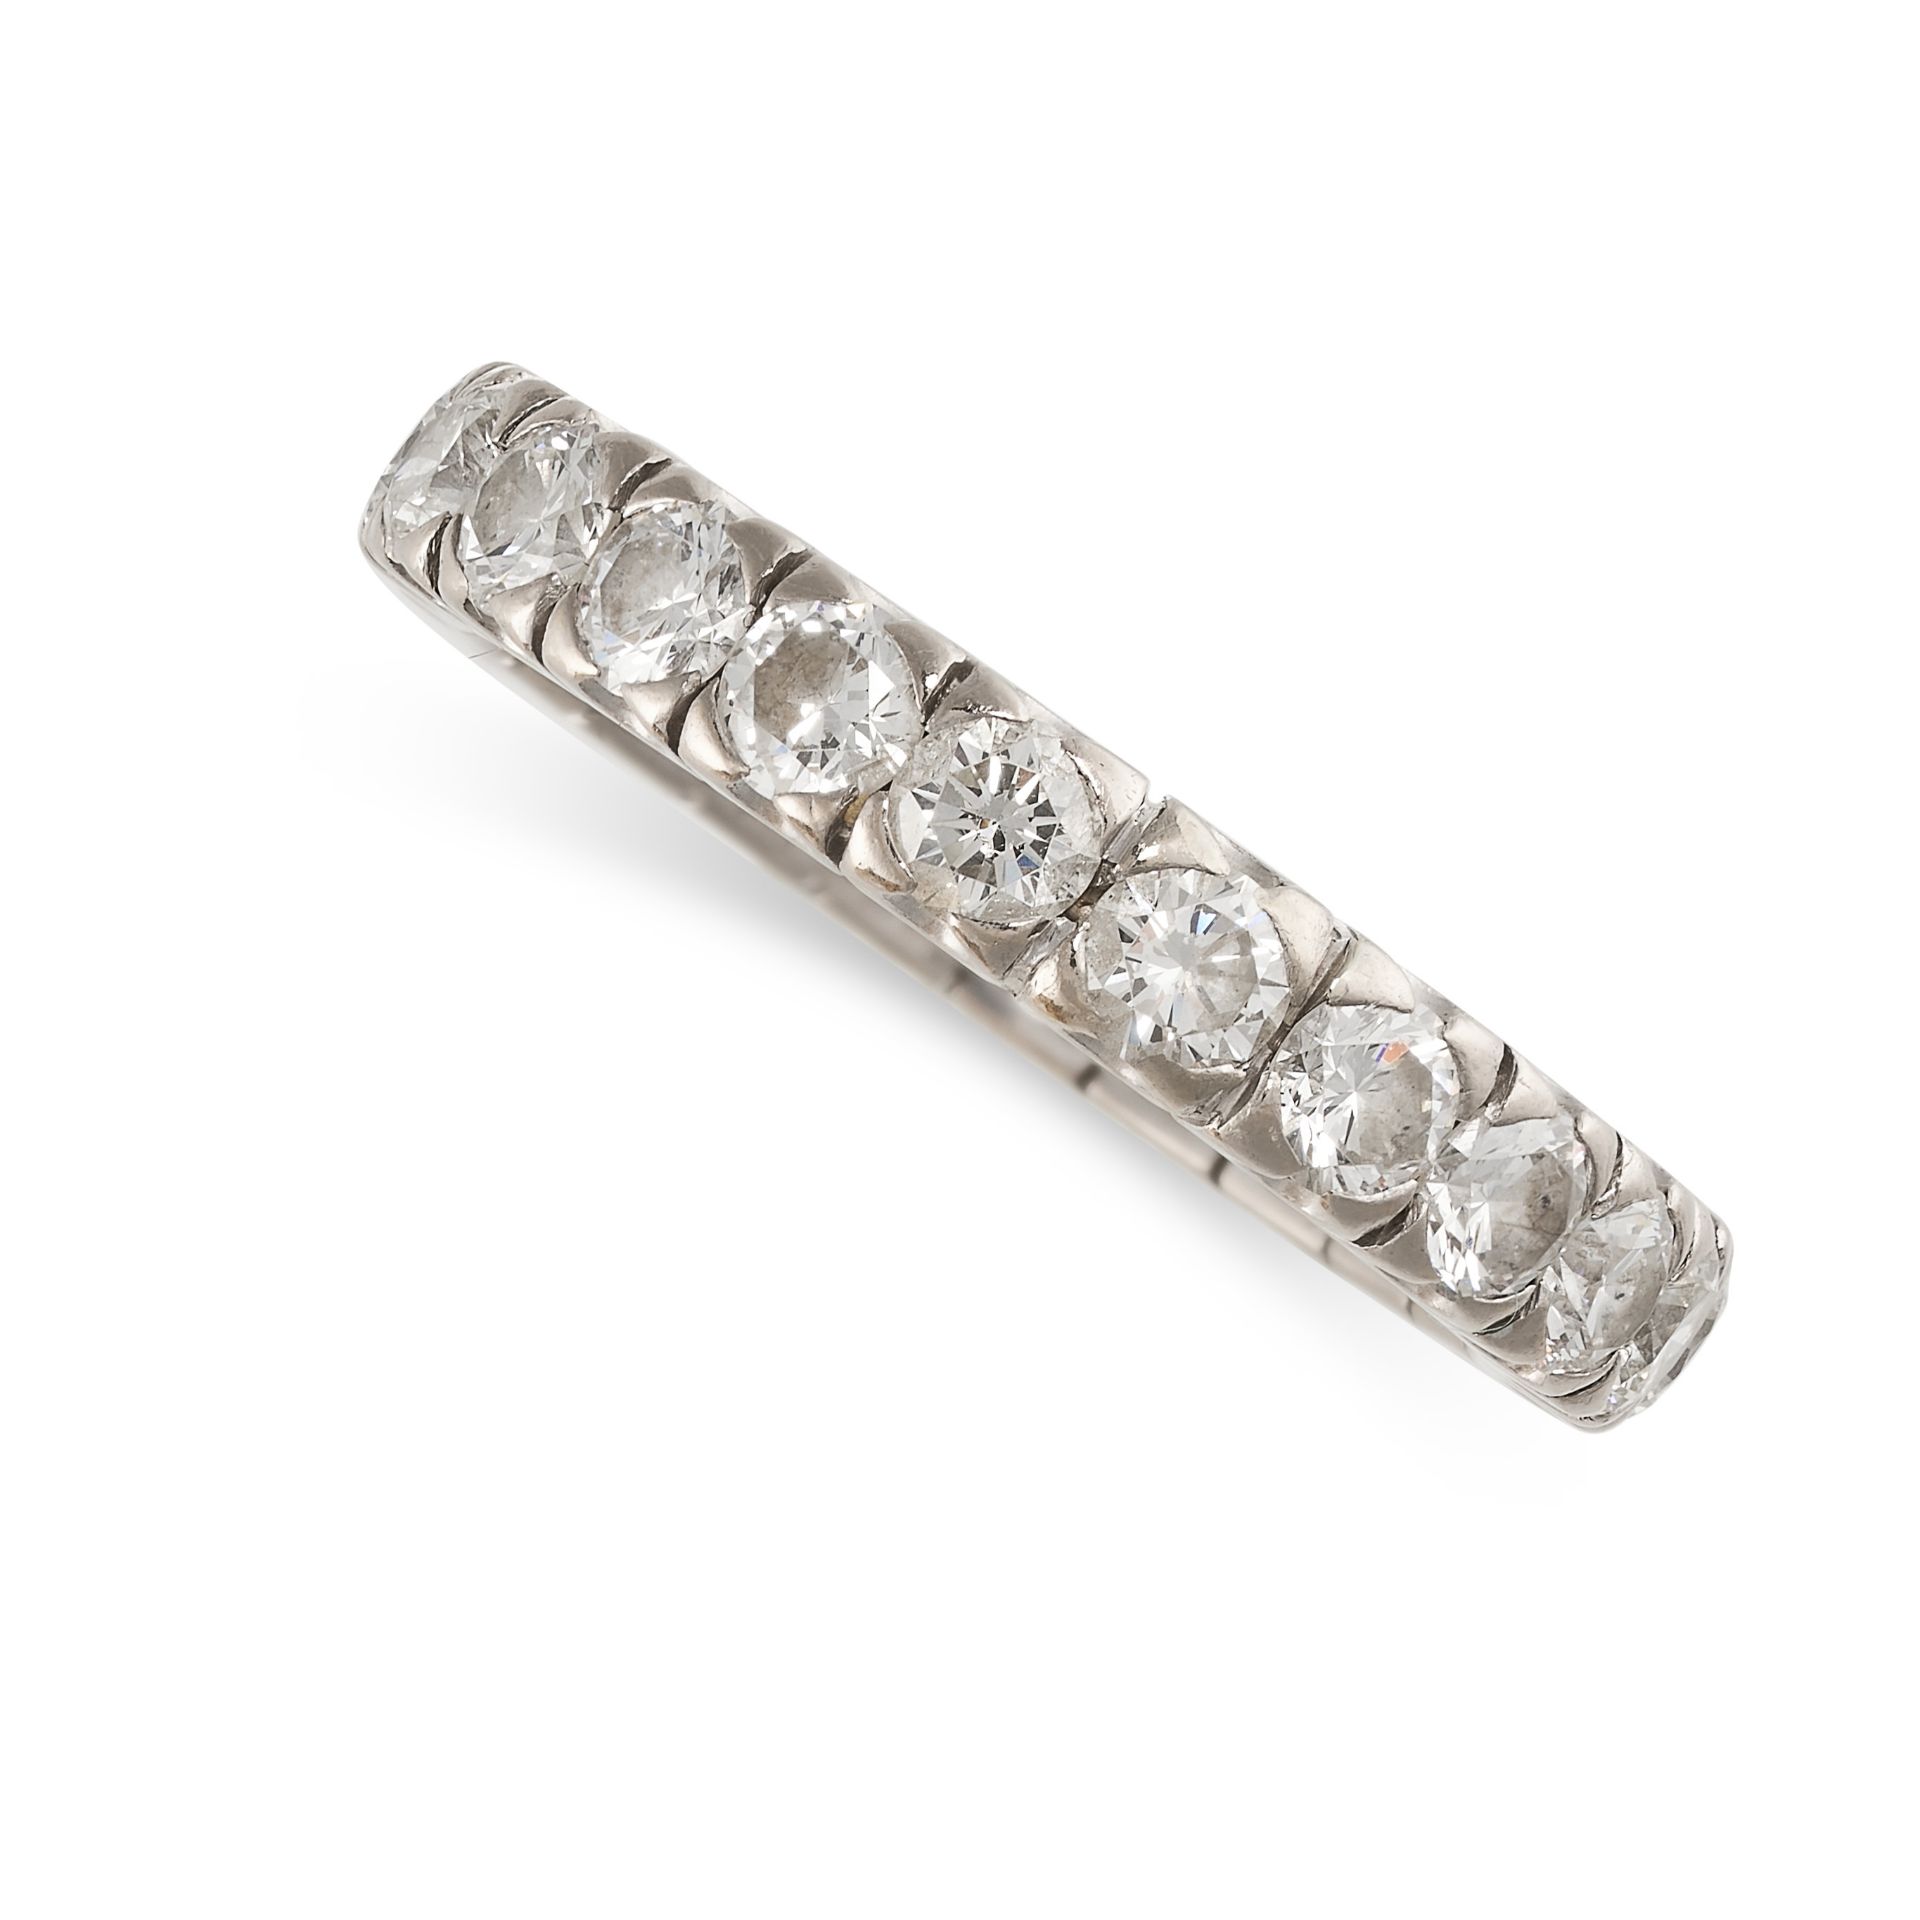 MAPIN & WEBB, A DIAMOND ETERNITY RING in 18ct white gold, designed as a full eternity, set with